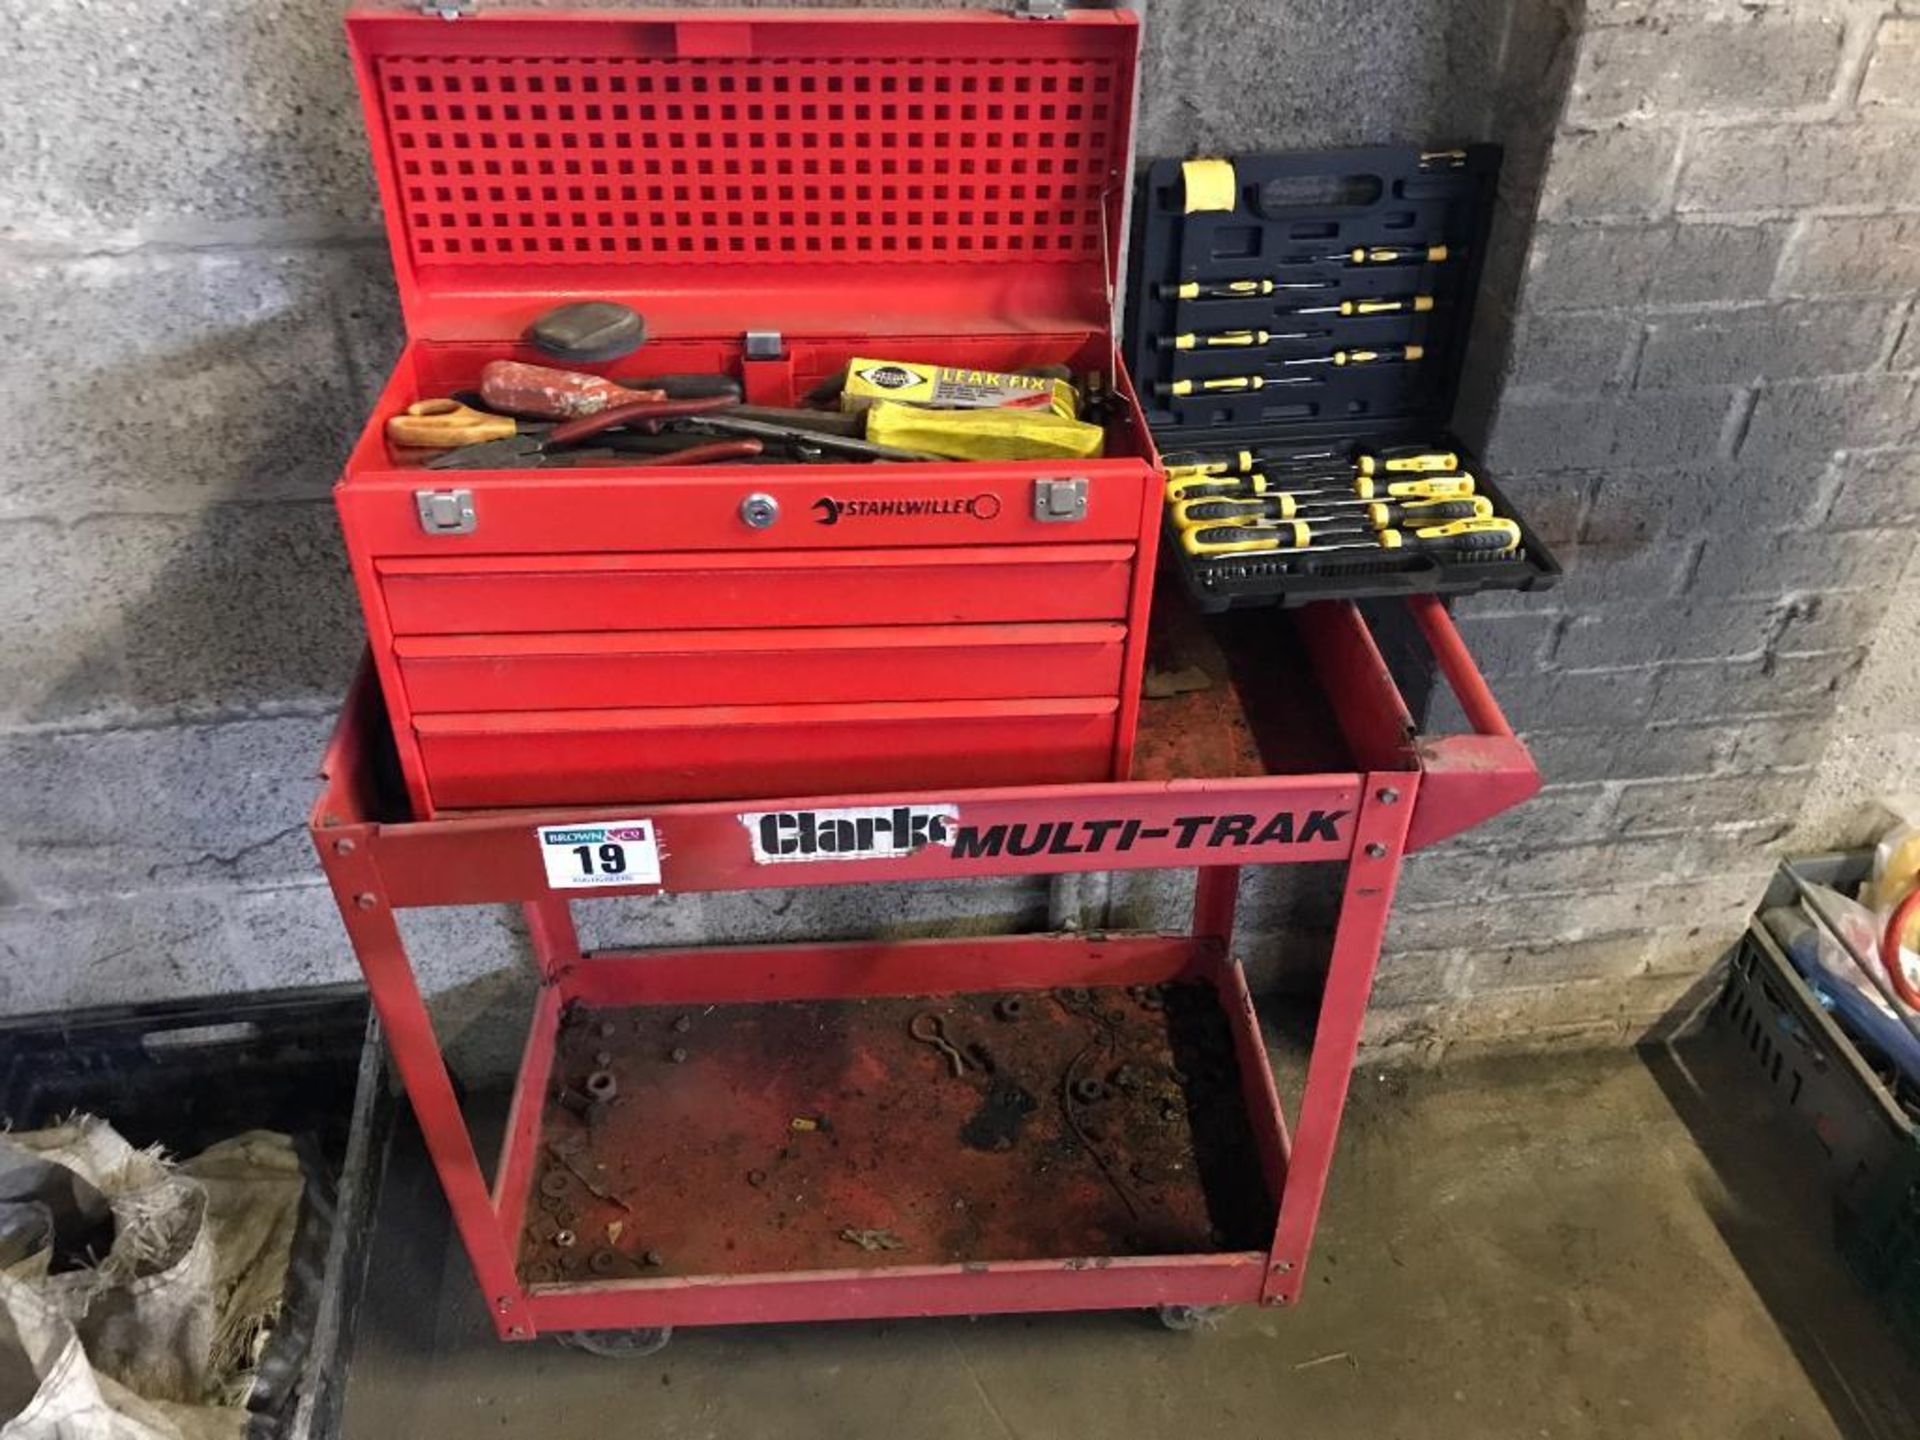 Stahlwille tool box with various tools